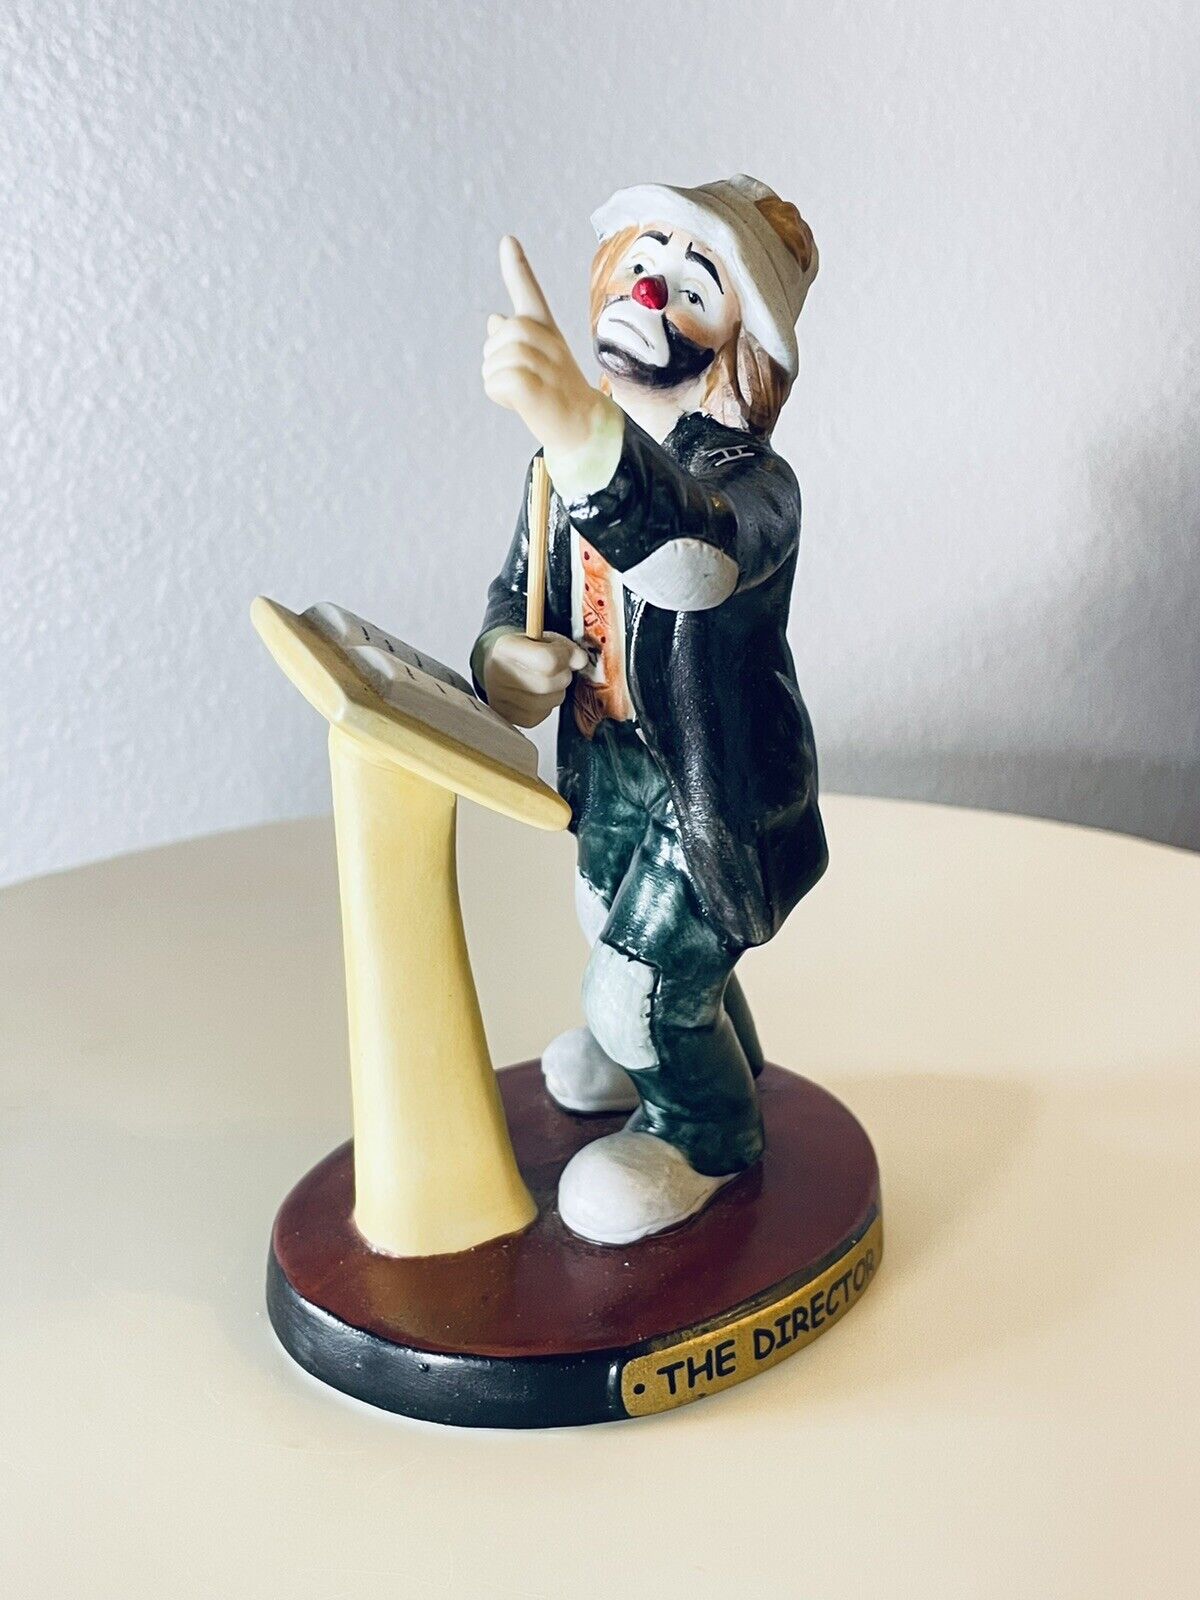 RARE ~The Original Emmett Kelly Circus Collection “The Director” Figurine HTF